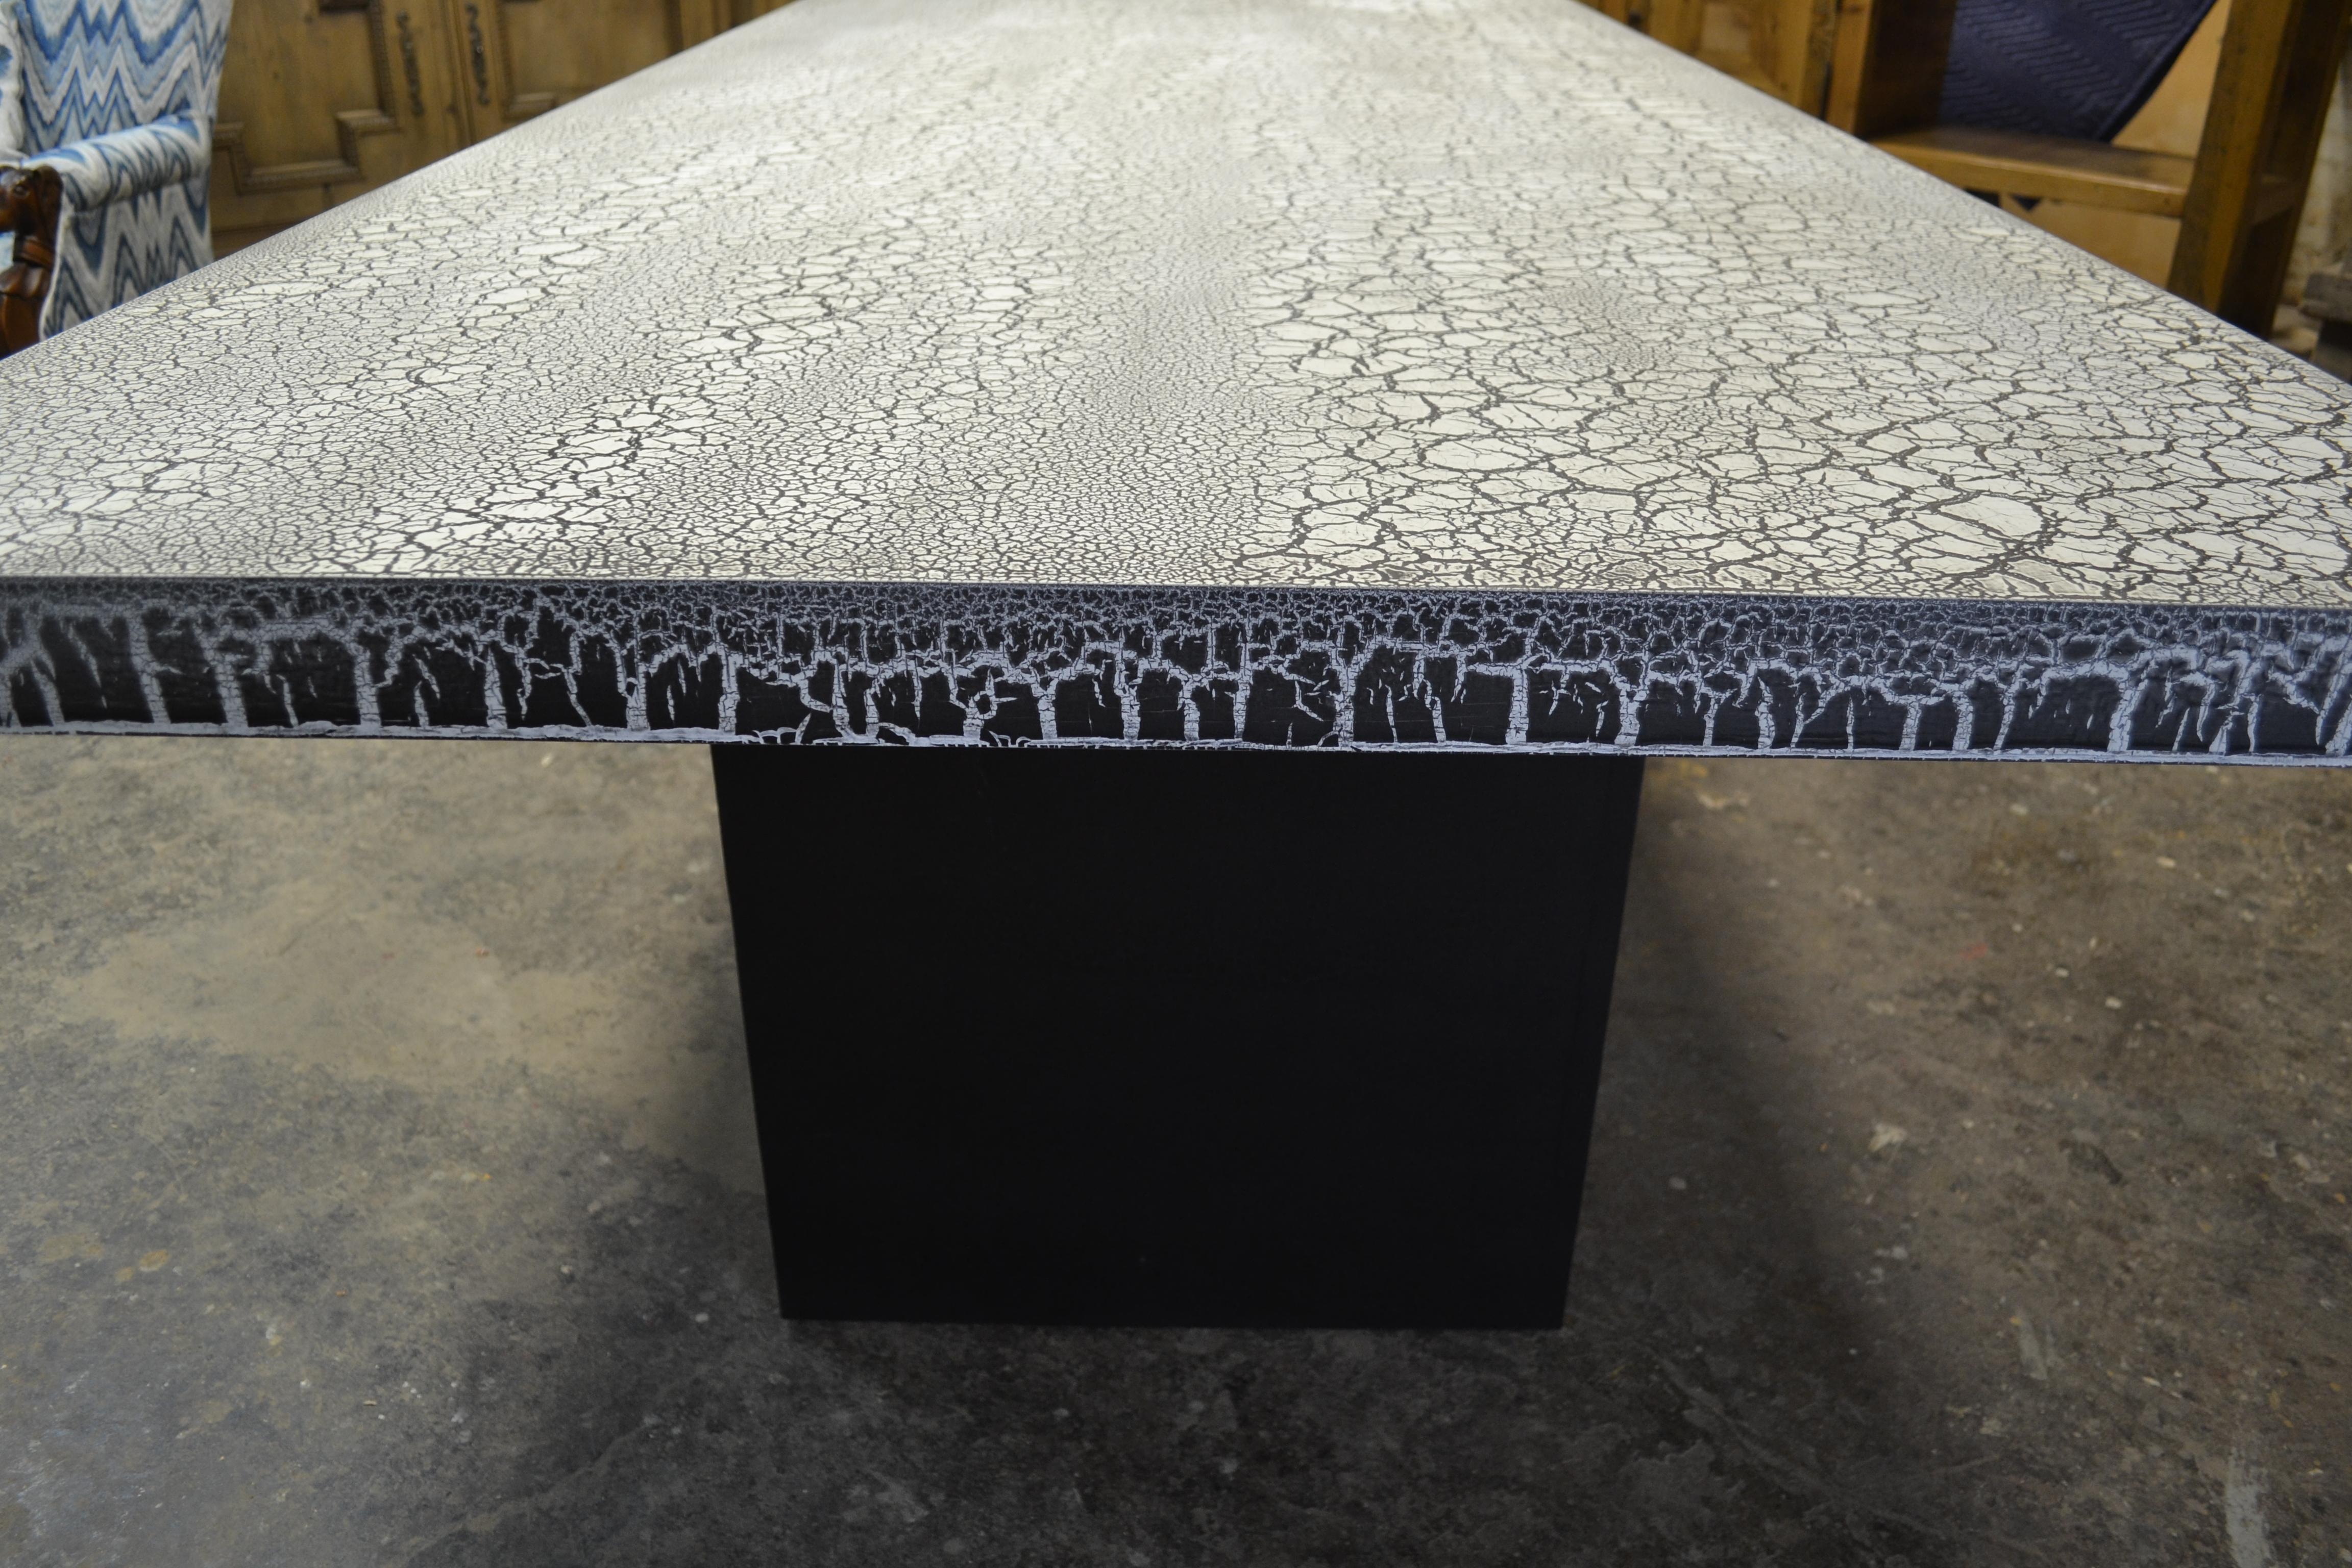 The Krackle table features a top crackle surface of white over black, an edge surface of black over white and a base in black on black crackle. The reveals of the legs and stretcher offer a sophisticated touch and the piece is available in any size